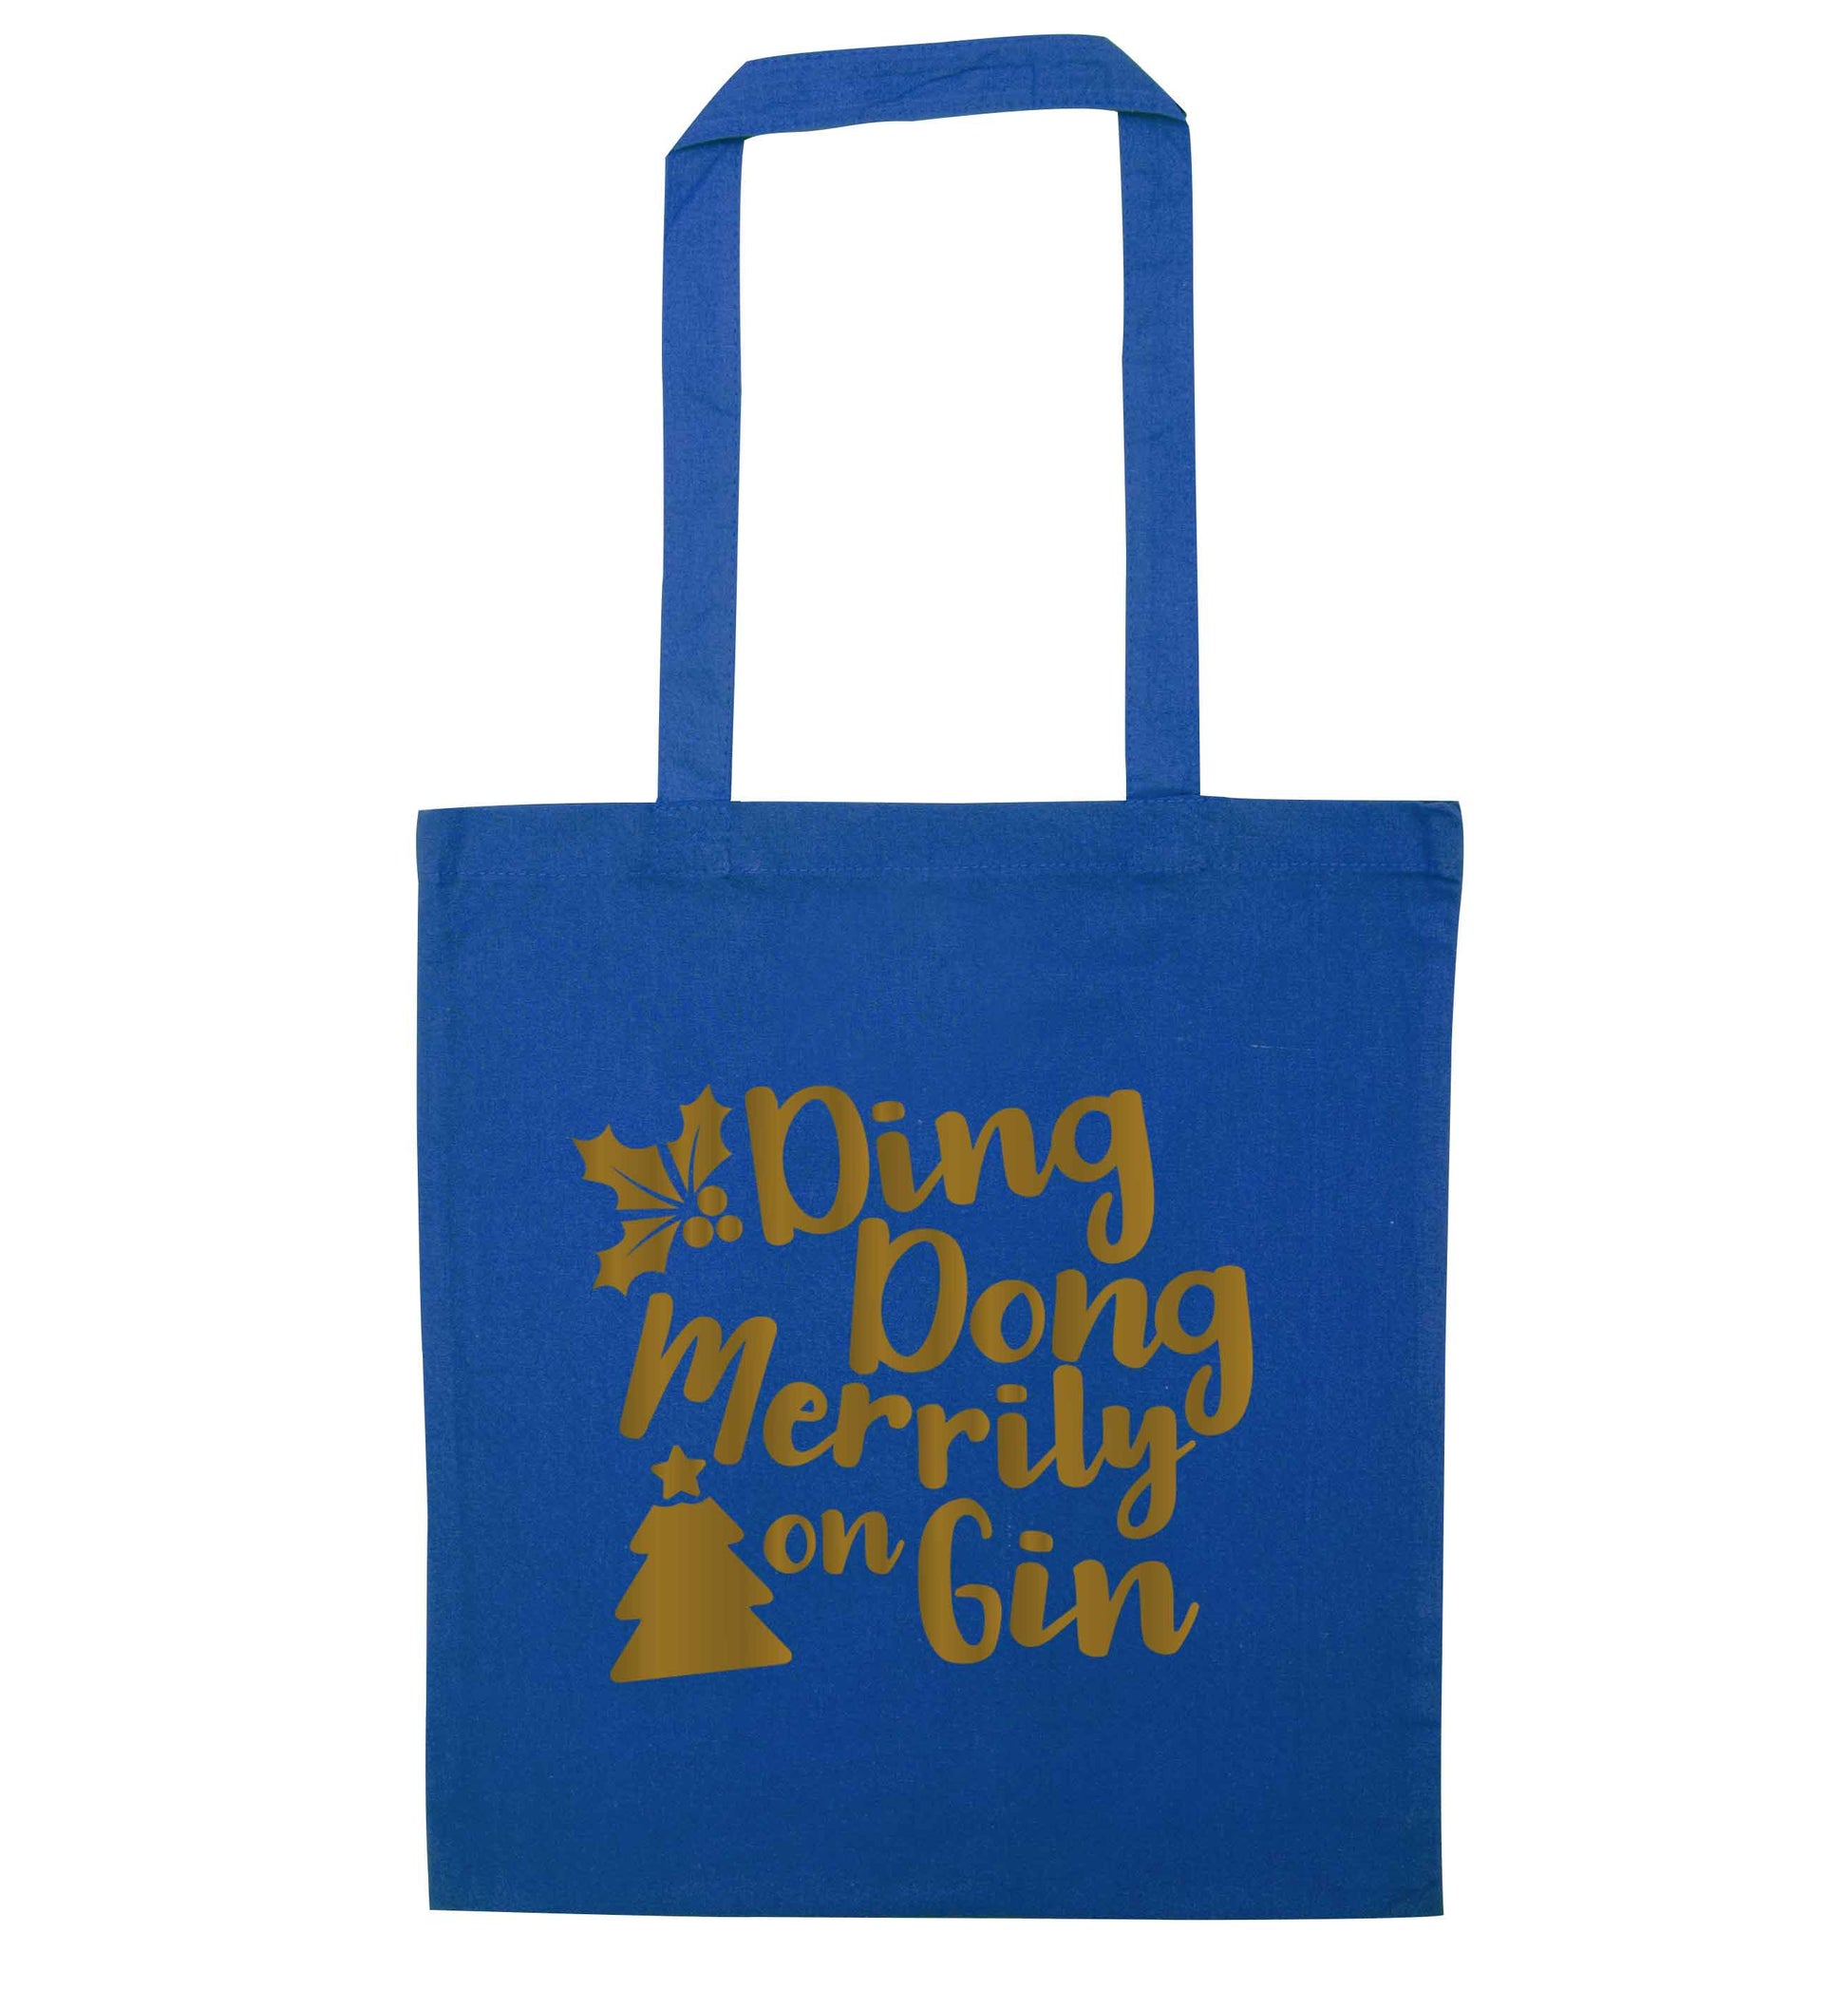 Ding dong merrily on gin blue tote bag